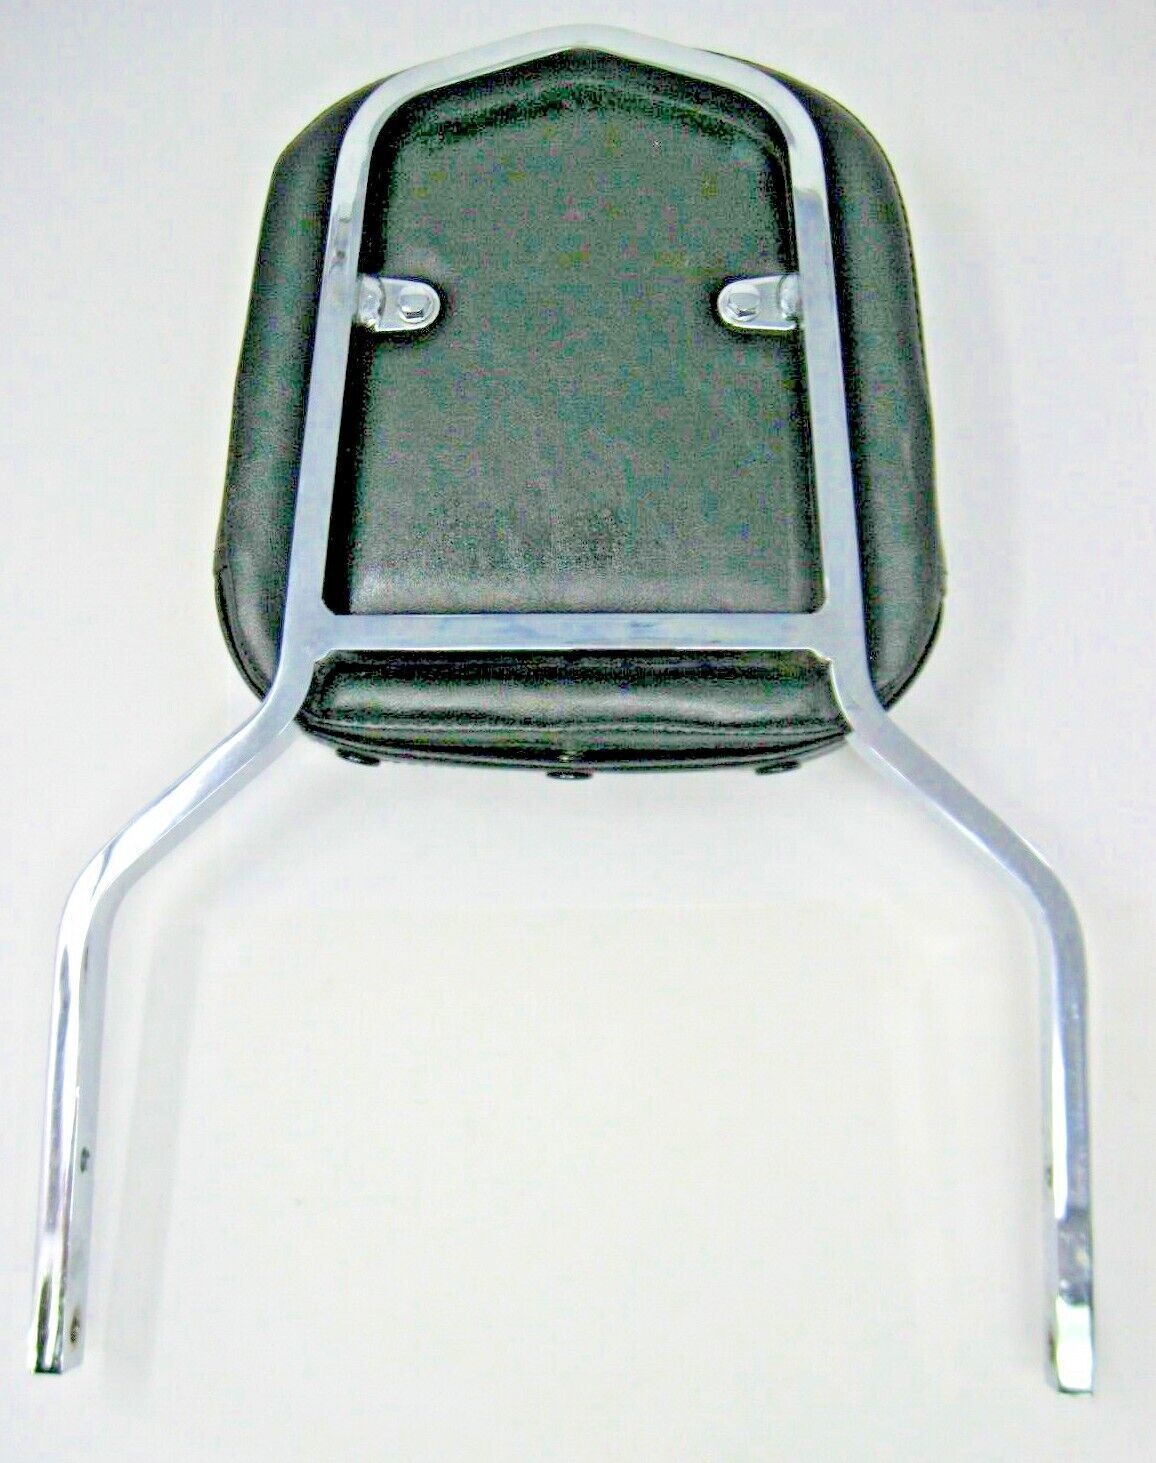 Sissy Bar Back Rest, Appx 14" tall. Fitment Unknown